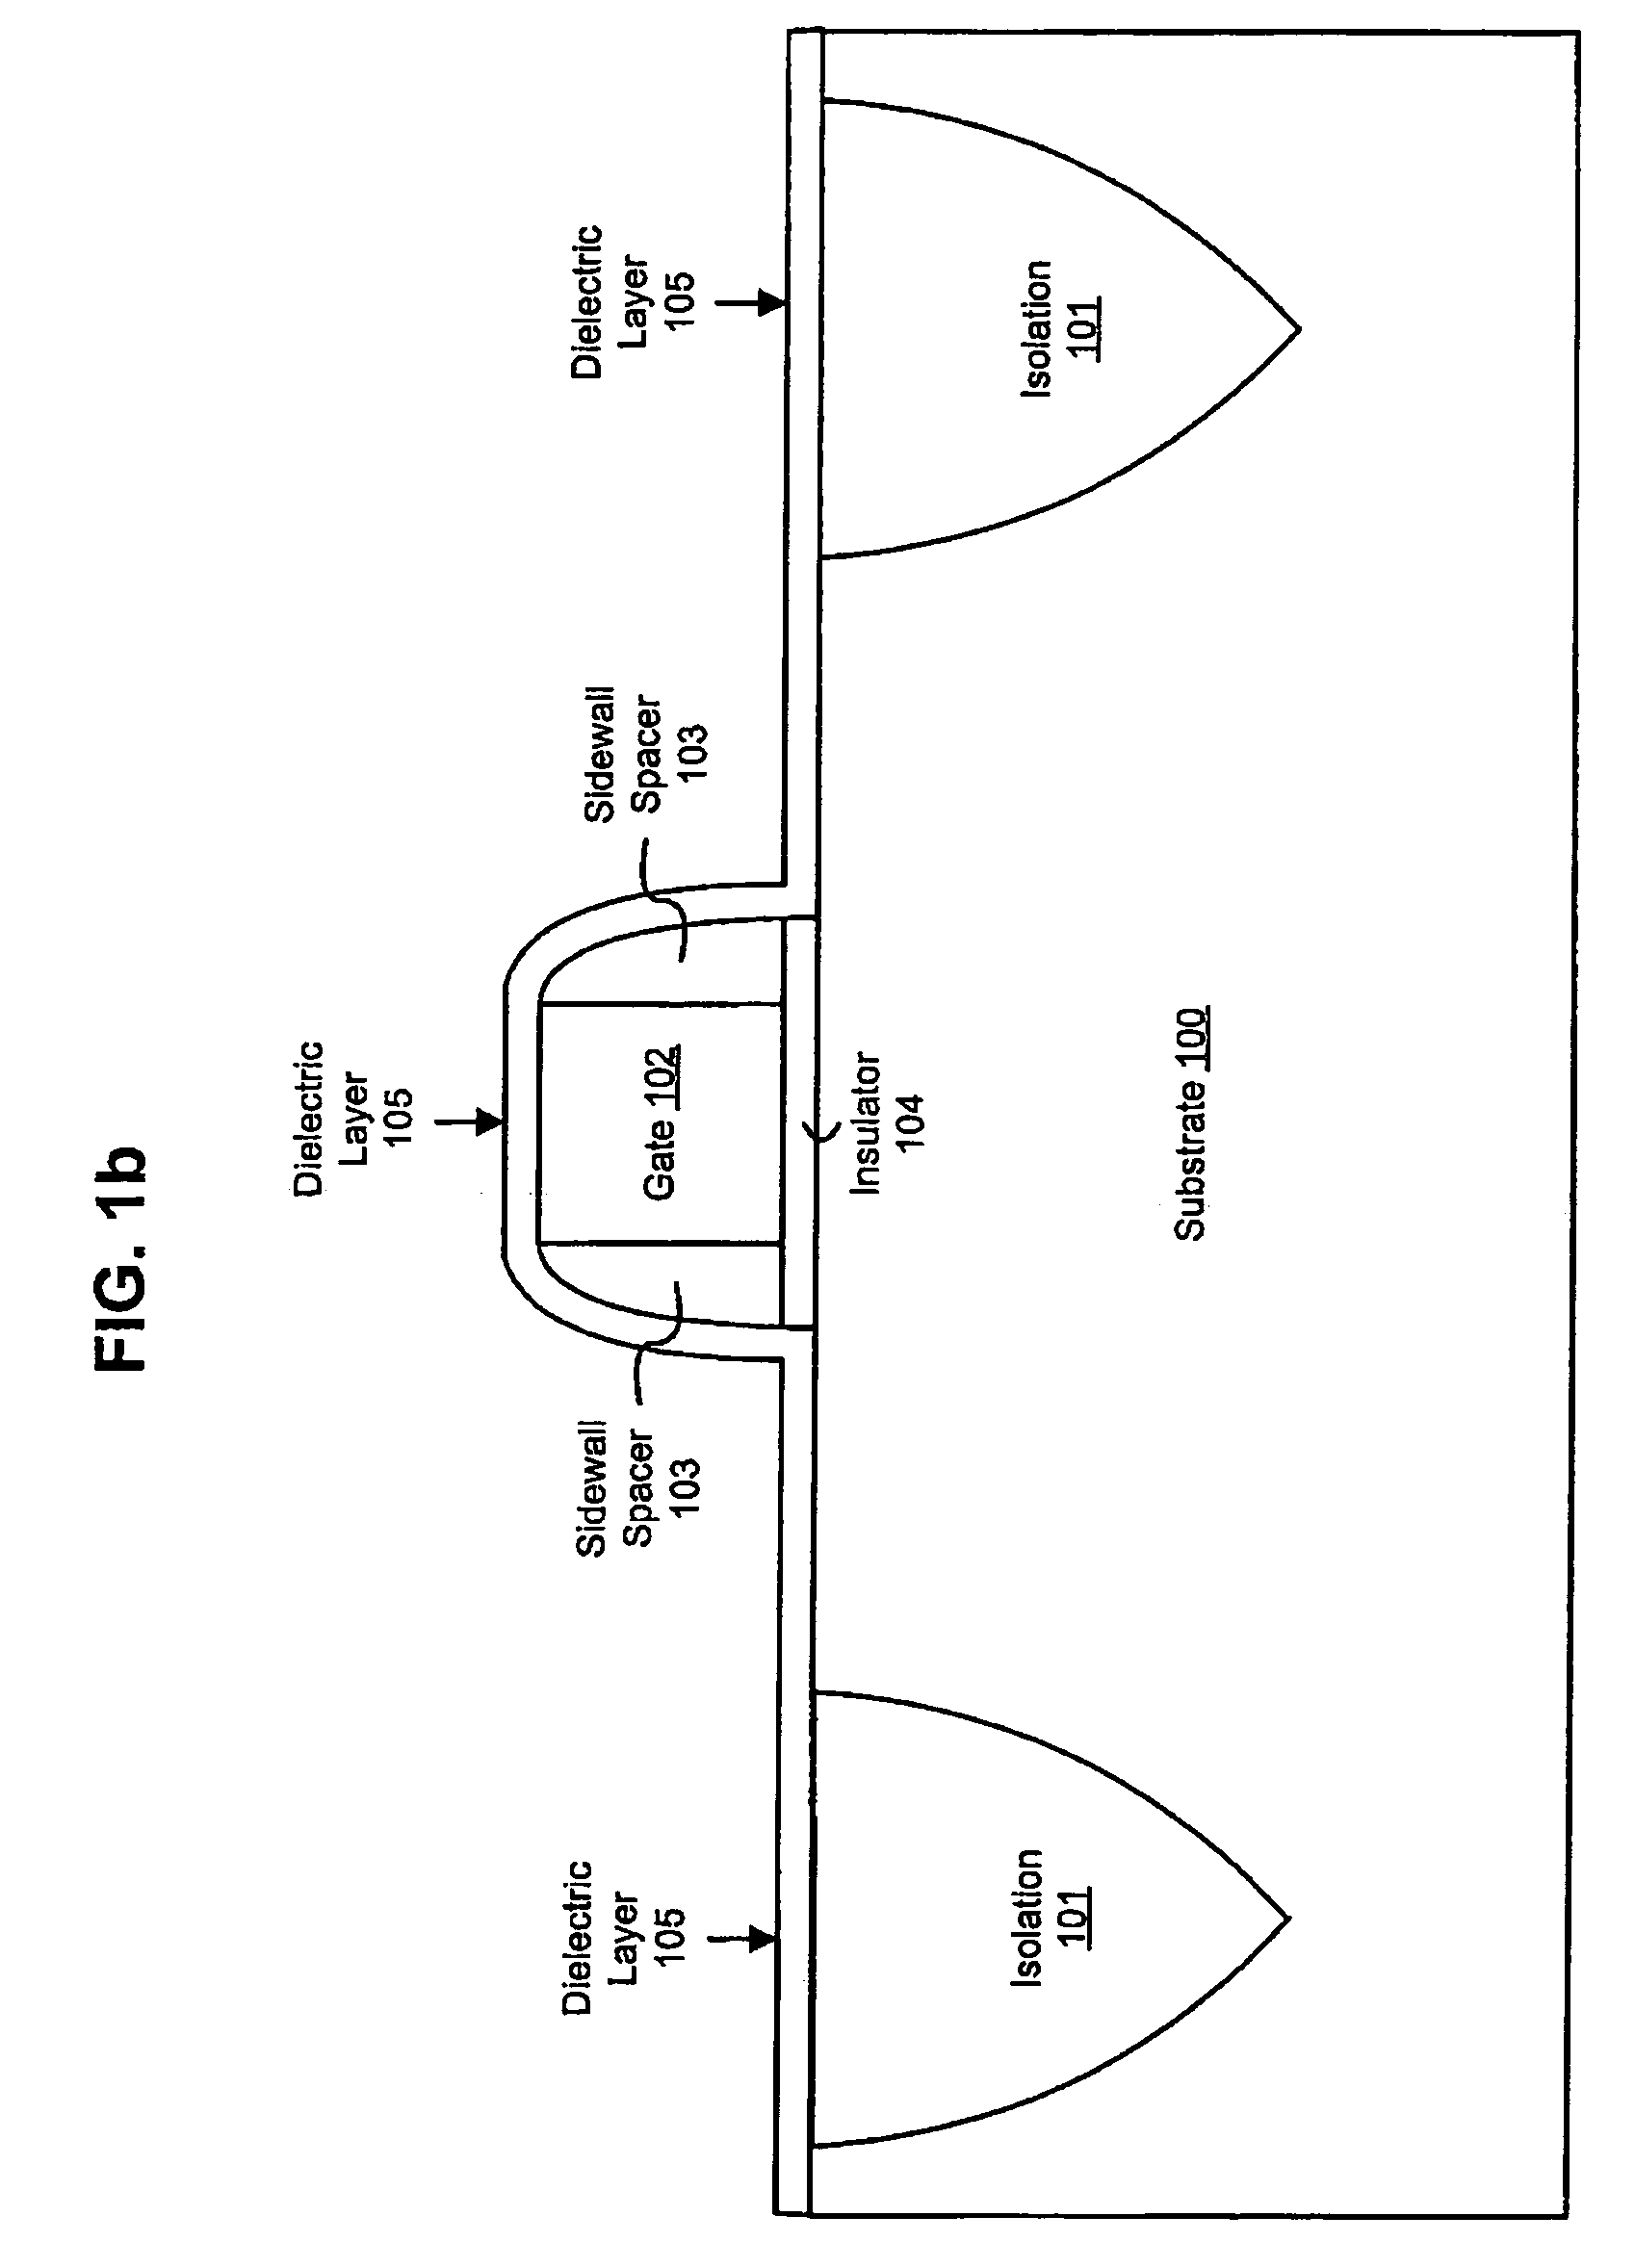 Method for improving transistor performance through reducing the salicide interface resistance